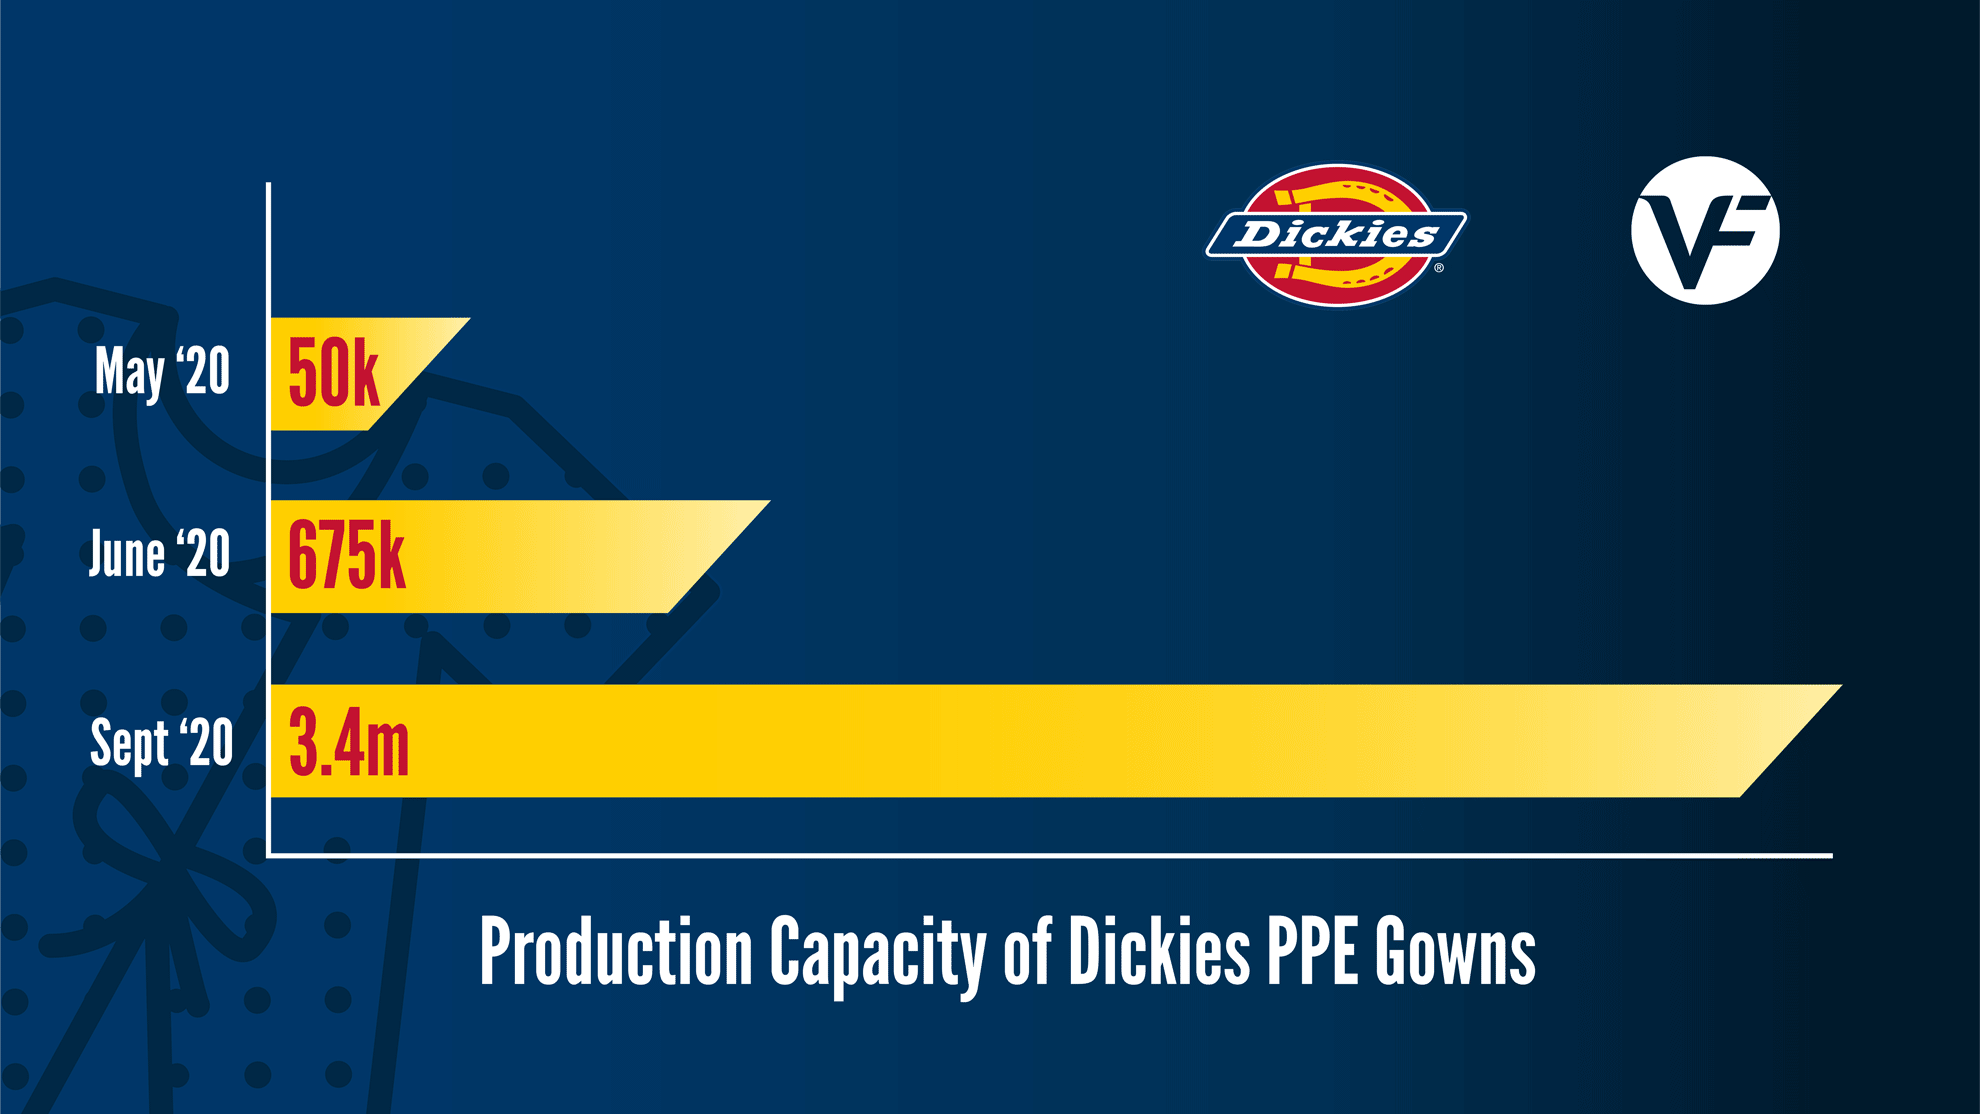 Graph of Dickies PPE gown production from May through September of 2020